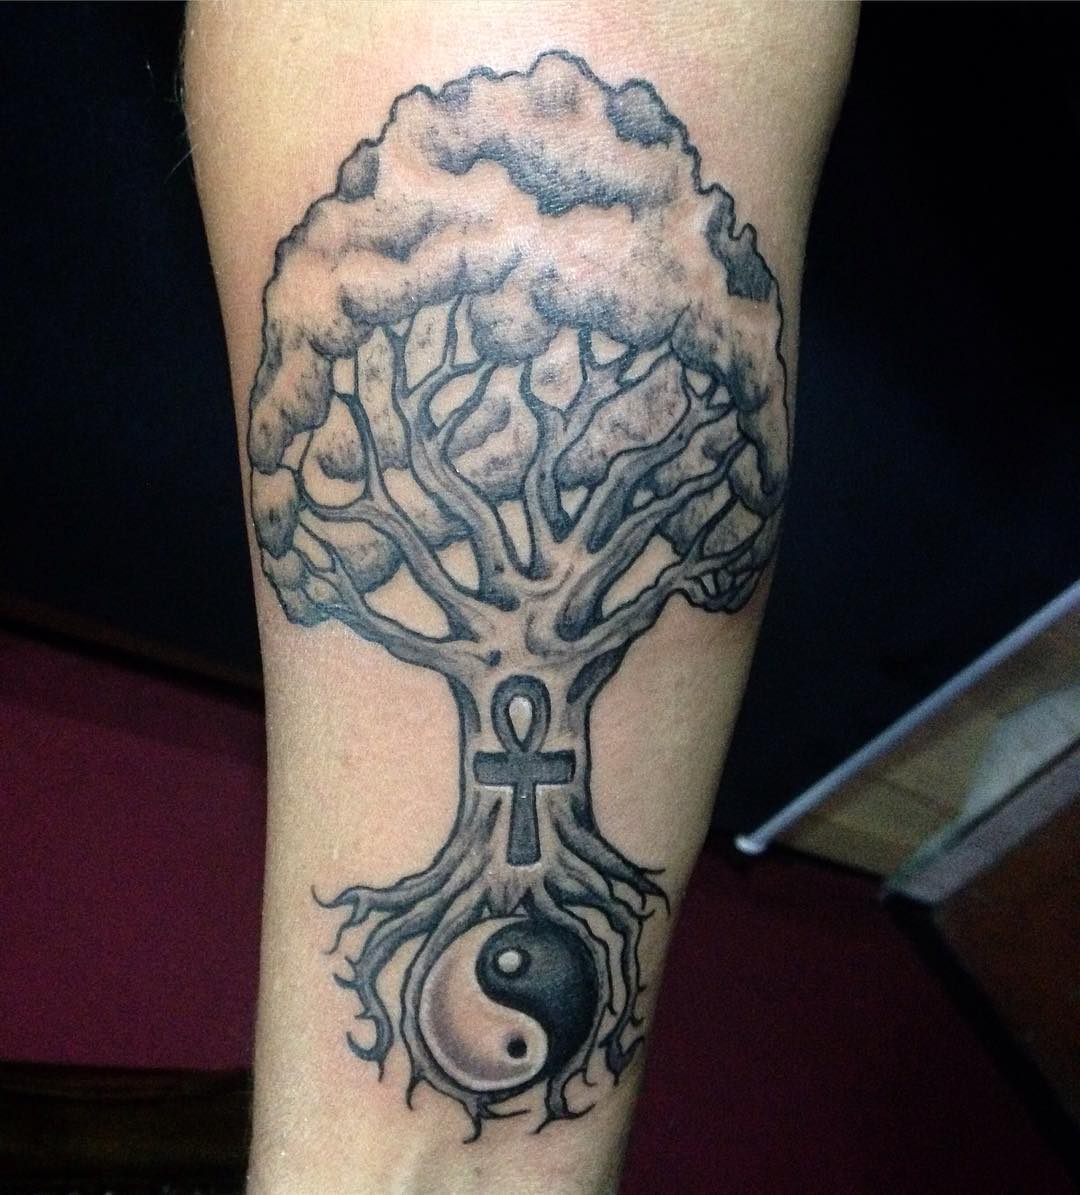 Black Ink Ankh With Tree And Yin Yang Tattoo On Forearm